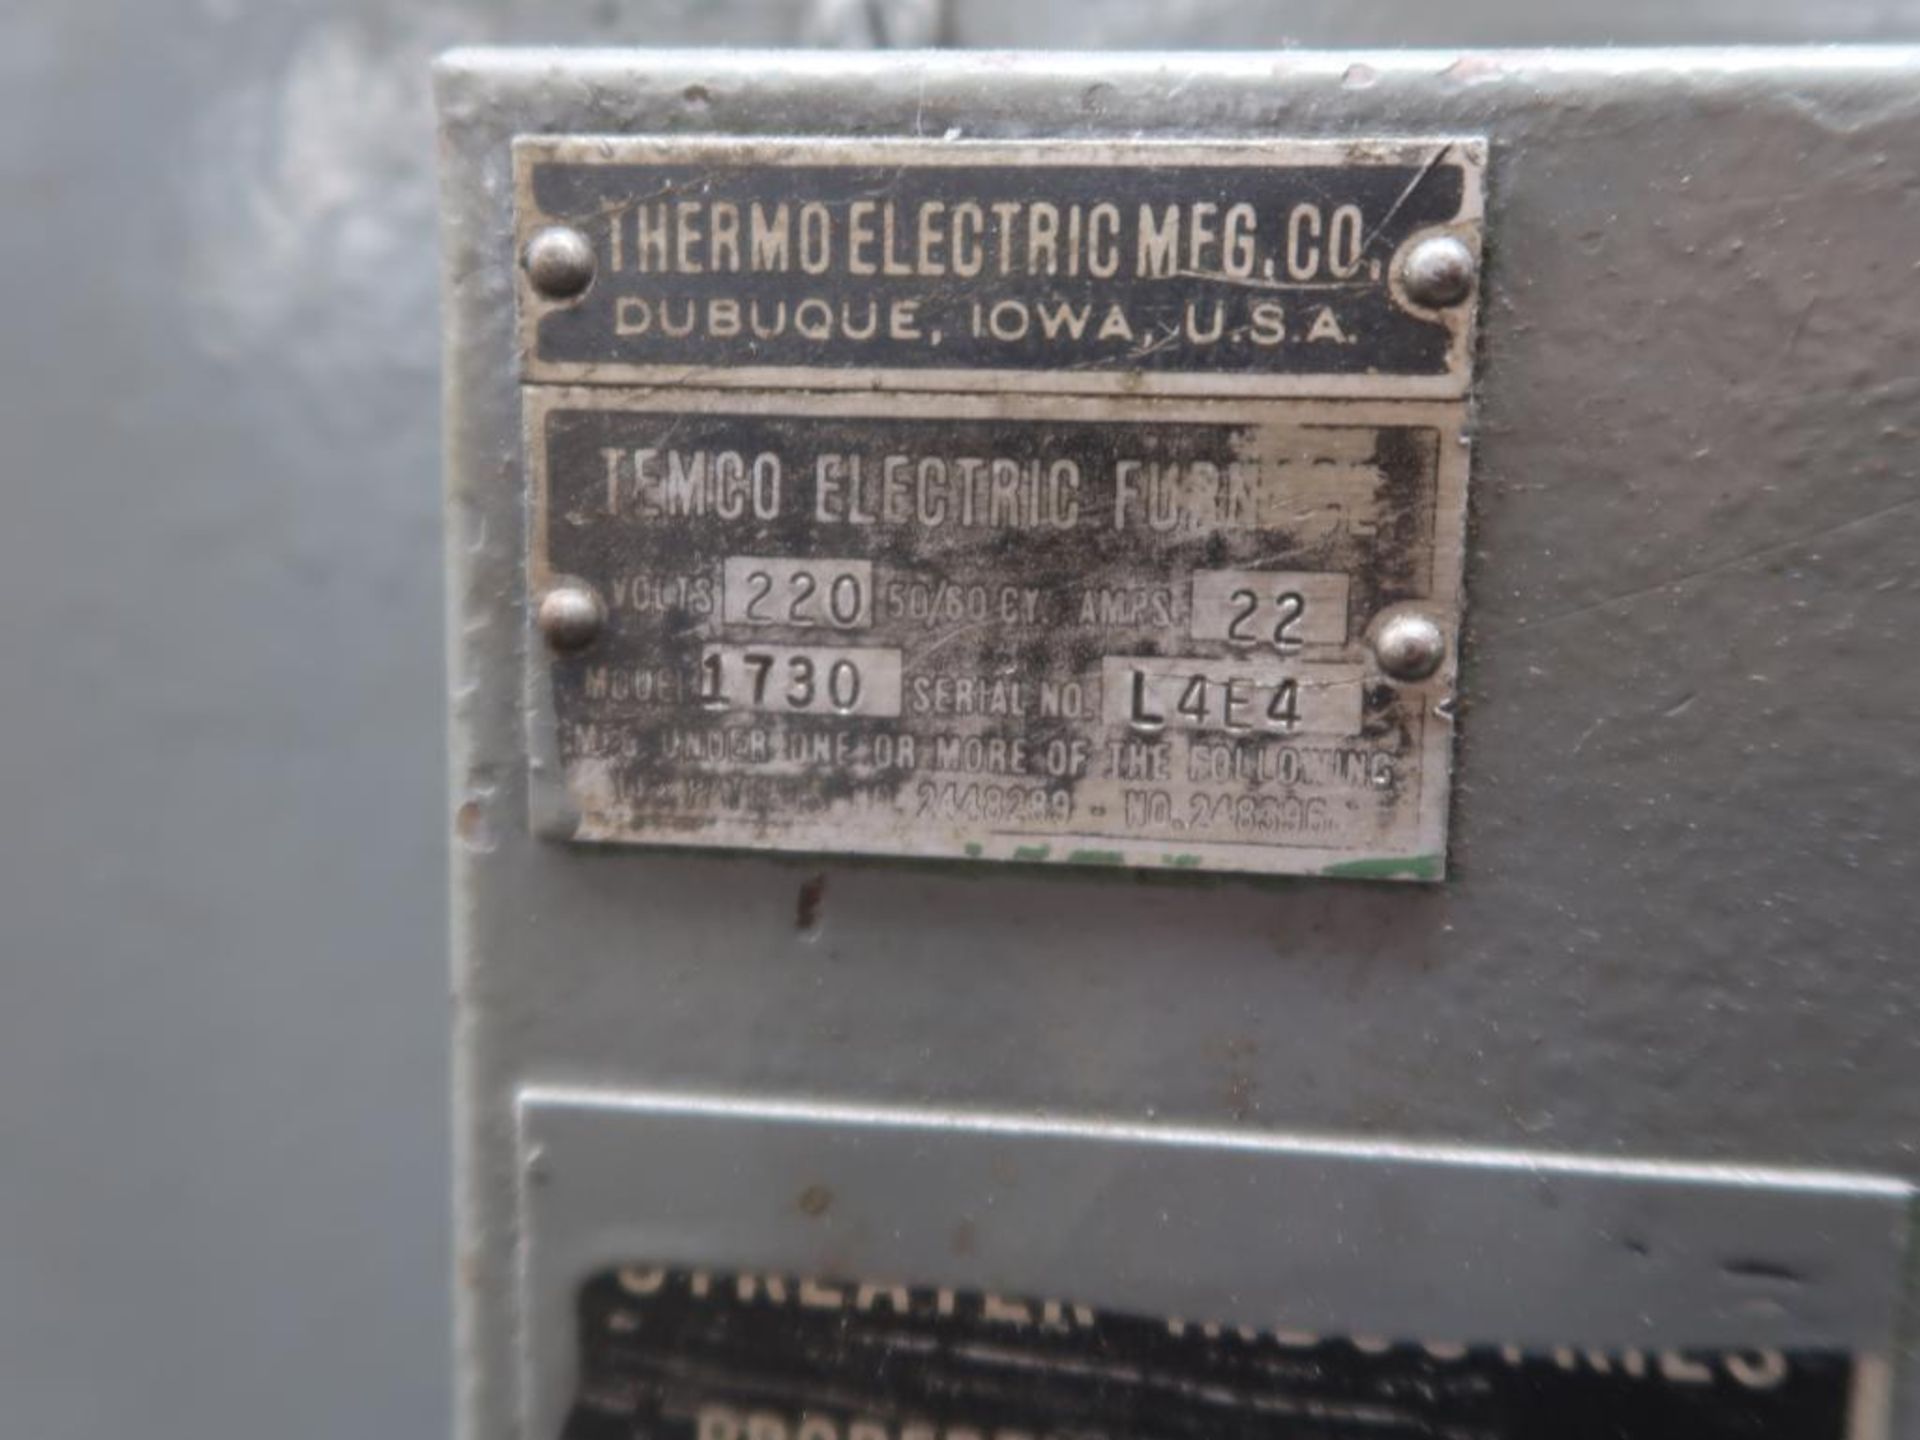 Tempco 10 in. x 10 in. (est.) Thermo Electric Furnace Model 1730, S/N L4E4, LOCATION: TOOL ROOM - Image 3 of 3